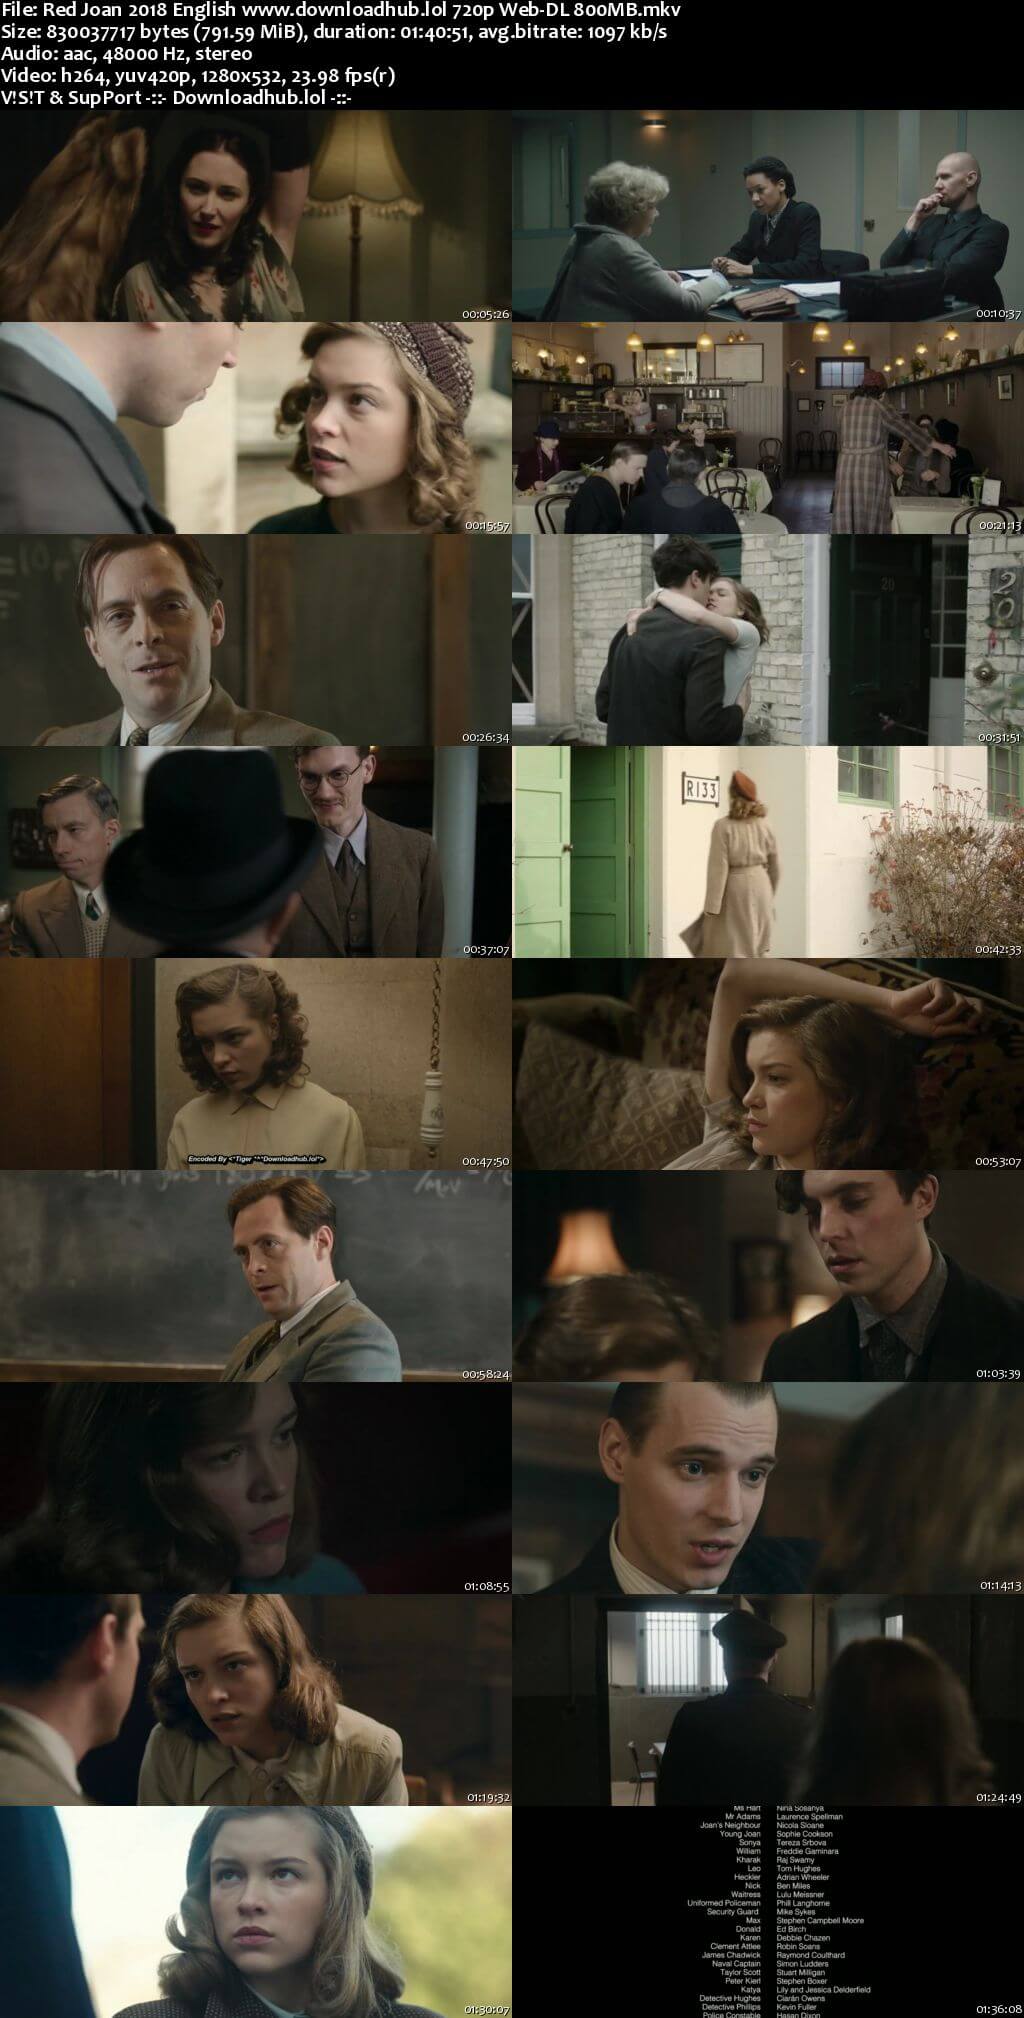 Red Joan 2018 English 720p Web-DL 800MB